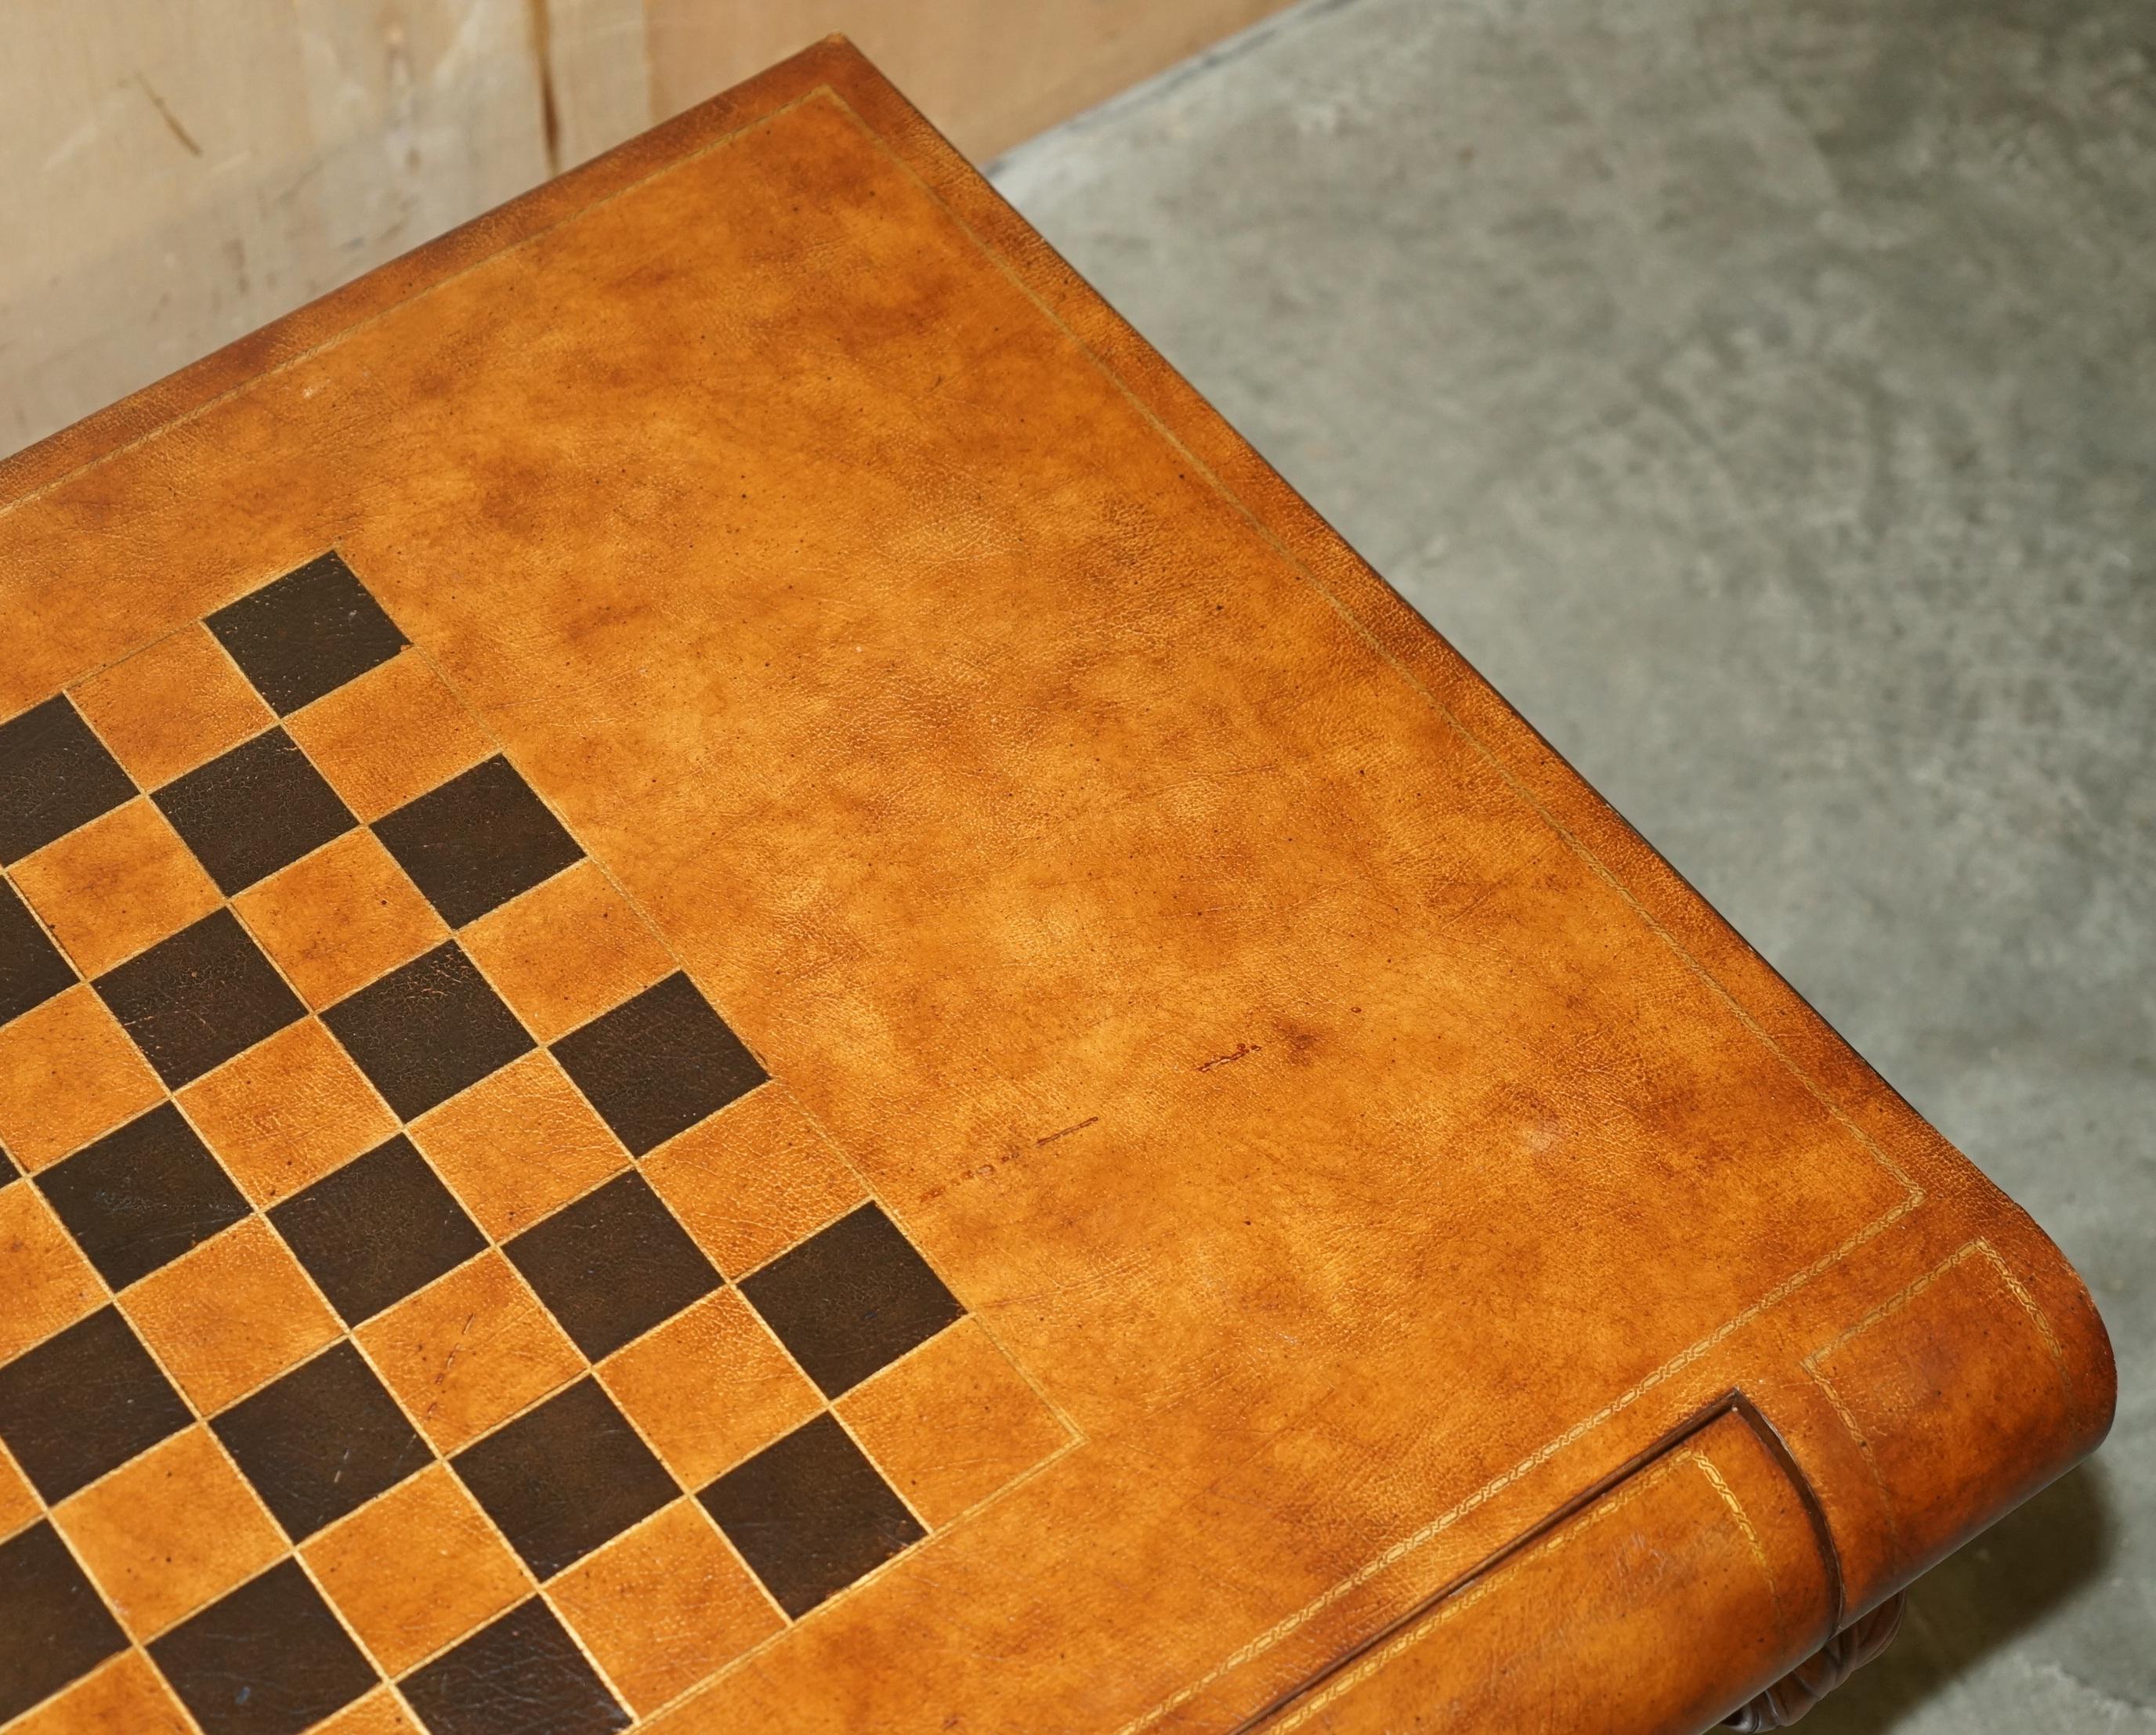 STUNNiNG HANDDYED BROWN LEATHER SCHOLARS BOOK CHESSBOARD CHESS COFFEE TABLE (Leder) im Angebot